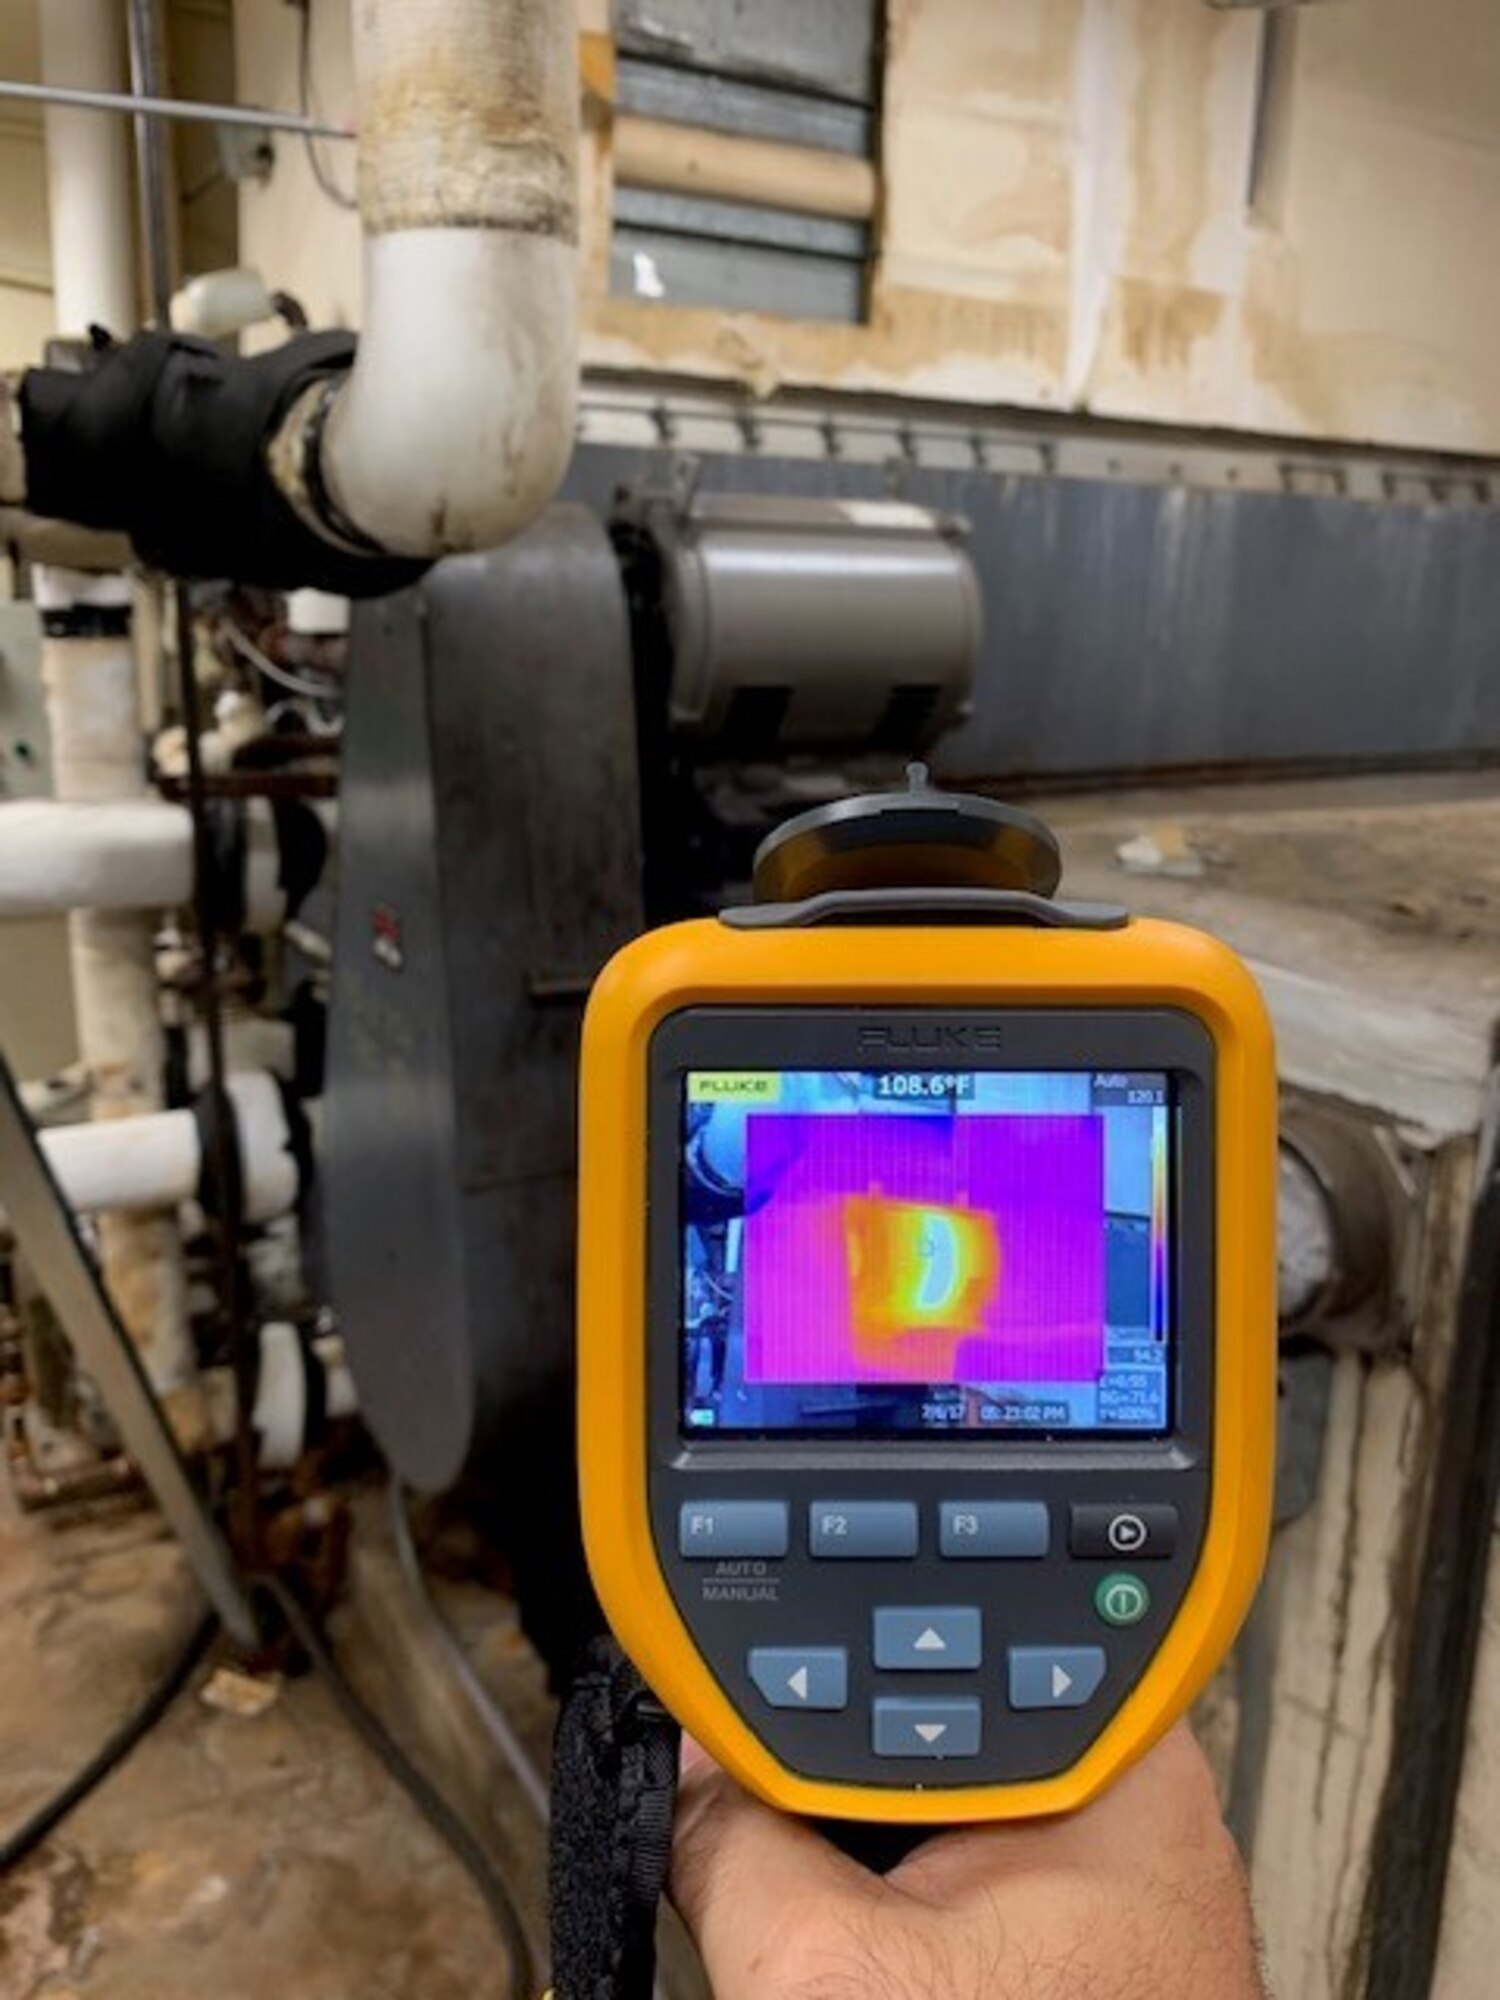 A thermal imaging camera is being used to perform energy audits.  It can identifies hot spots that are being overloaded, leaky windows or areas that are missing insulation causing hot/cold spots on the envelope of a building. (Courtesy photo)